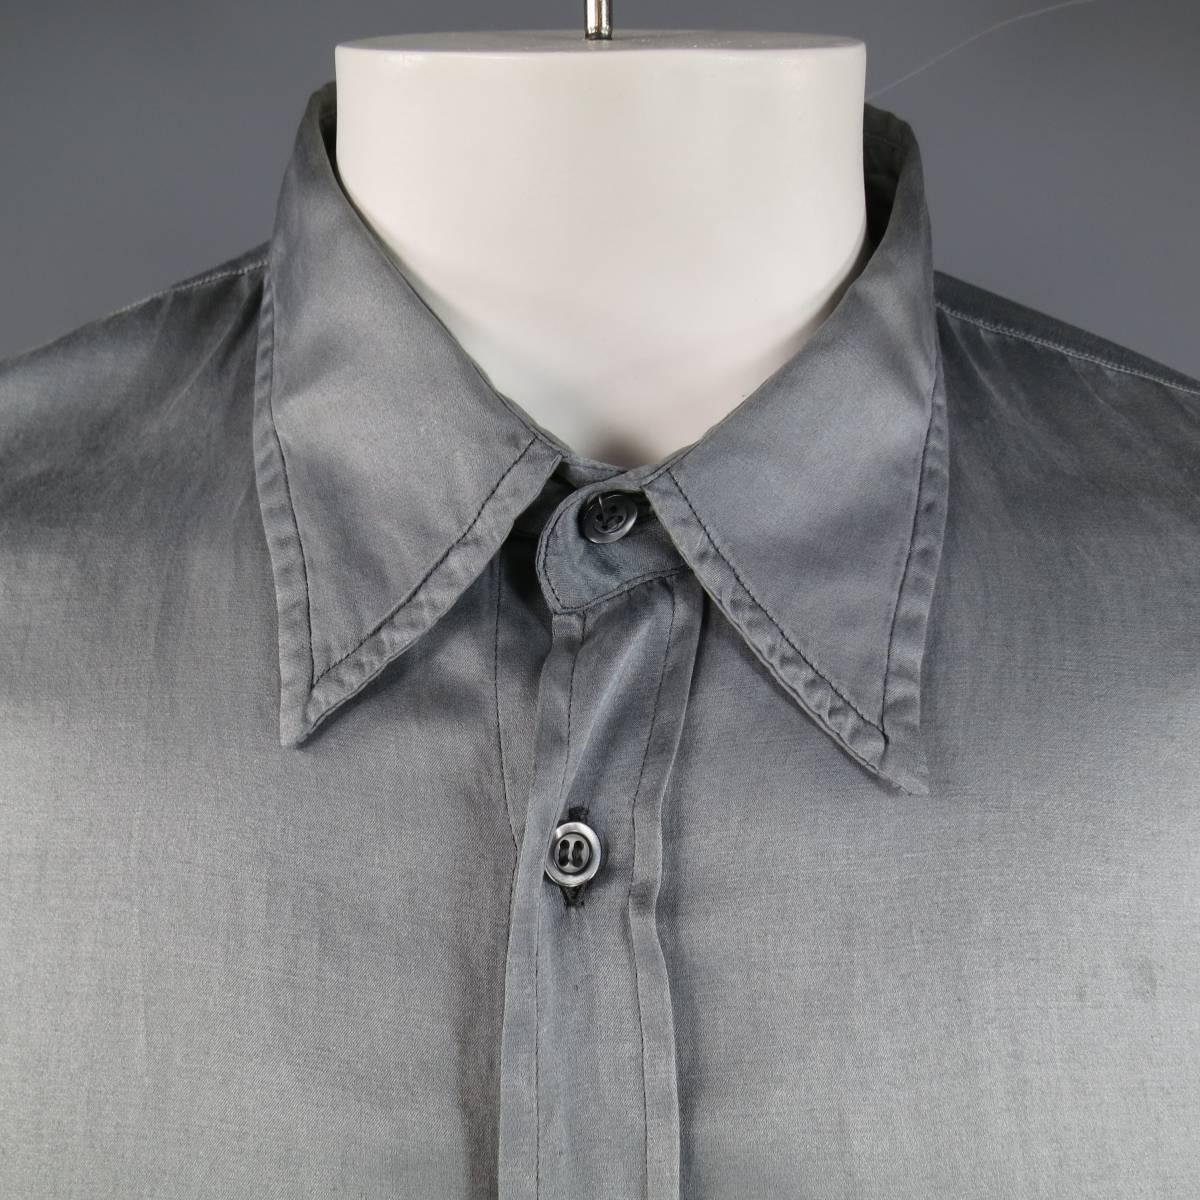 NICOLO CESCHI BERRINI casual dress shirt comes in a silk /cotton blend semi matte satin and features a pointed collar, and patch pocket. Minor mark on chest. Made in Italy.
 
Good Pre-Owned Condition.
Marked: IT 52
 
Measurements:
 
Shoulder: